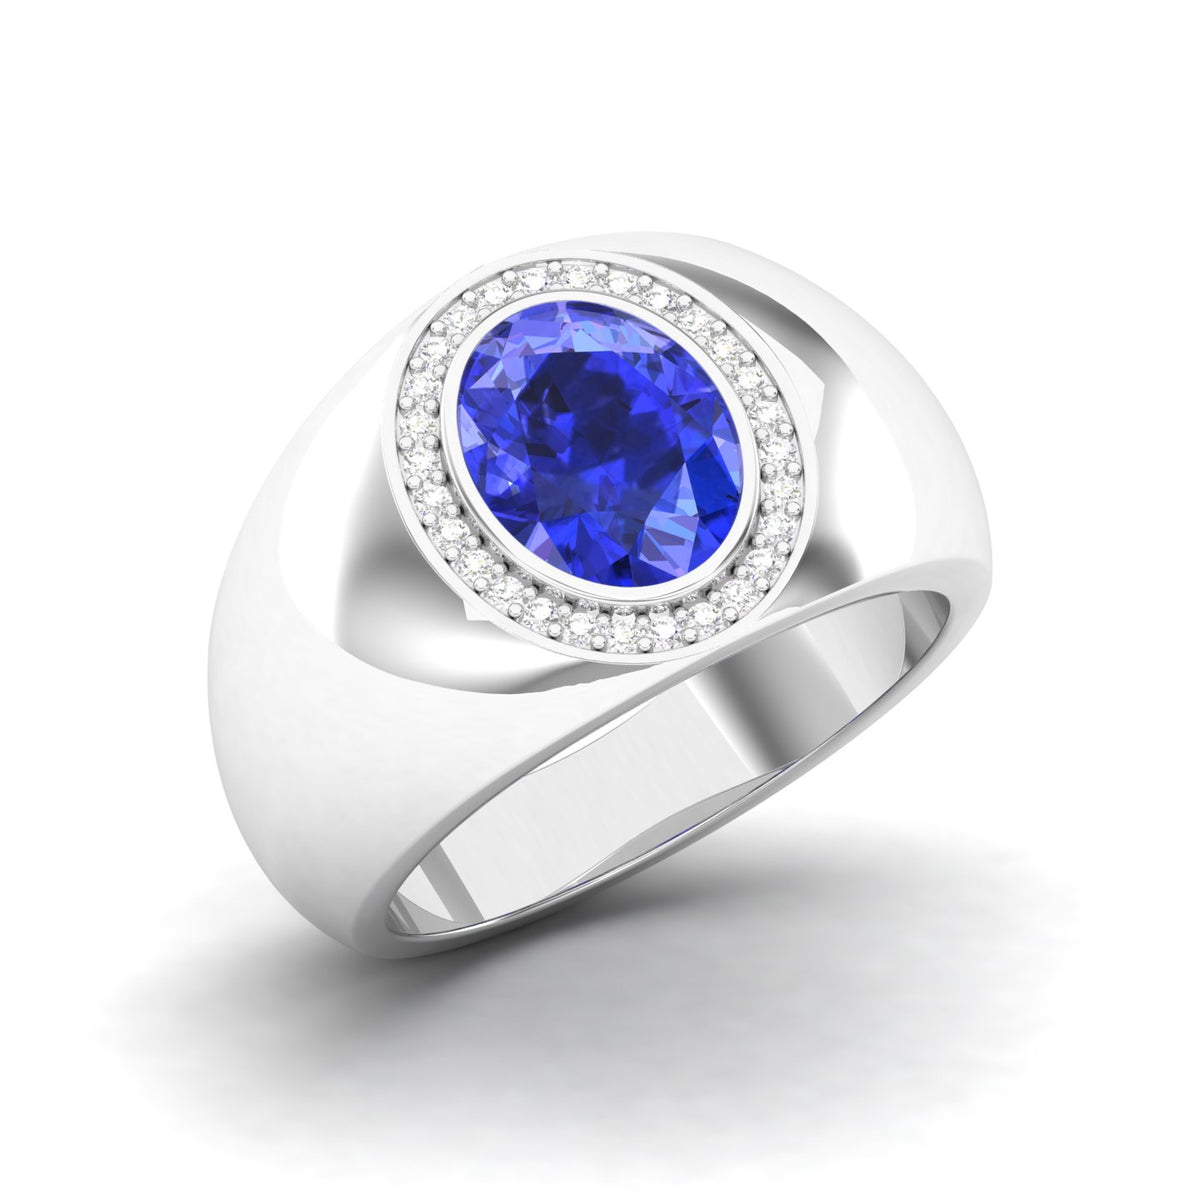 Maurya Solitaire Oval Tanzanite Signet Engagement Bold Ring with Diamond Halo